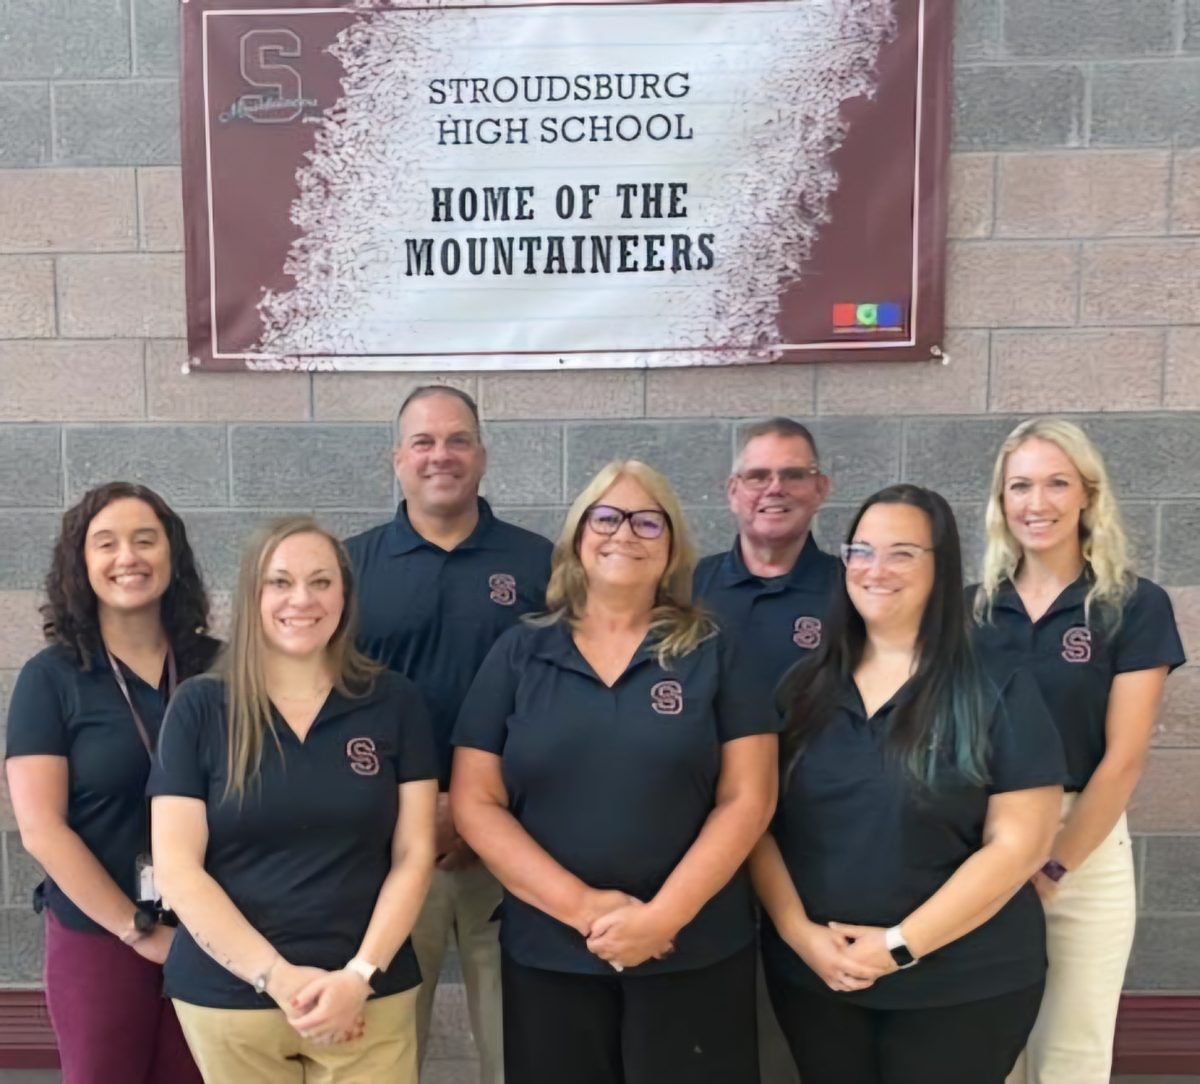 SHS Main office staff picture: left to right. 
Assistant Principal, Christine Gangaware, Jessica Smith, Dawn Maletz, Nicole Litts, and Jena Gmelch. 
Back row: Mr. Sodl and Mr. Burke. 
Photo submitted by Christine Gangaware. 